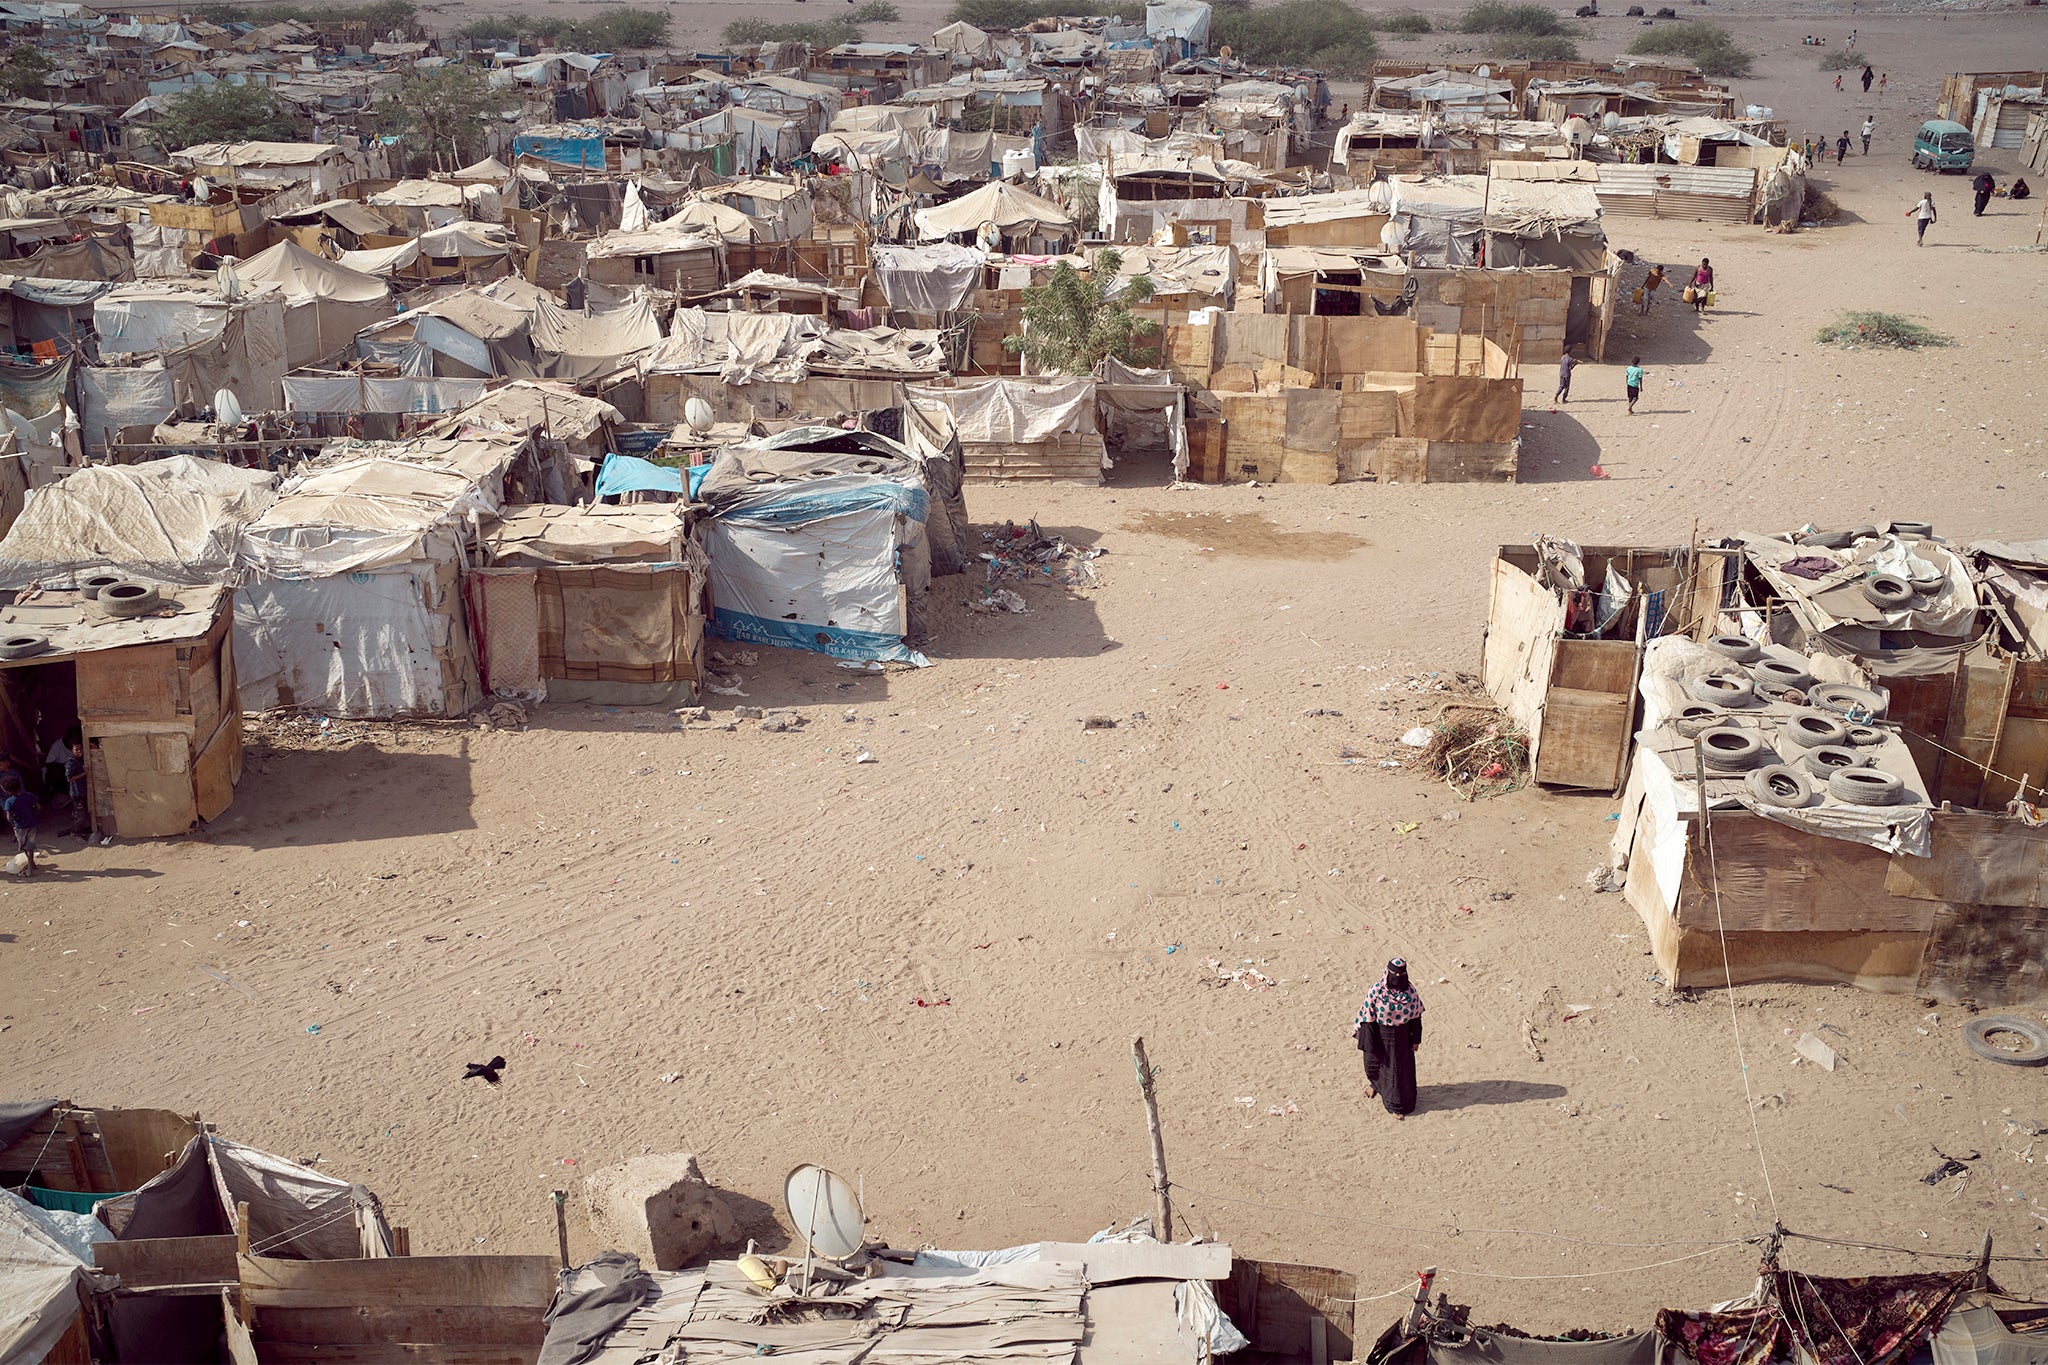 The Ammar Bin Yasser site in the Dar Sa’ad district, Aden. More than four million internally displaced people are estimated to live in more than 1,700 sites across Yemen